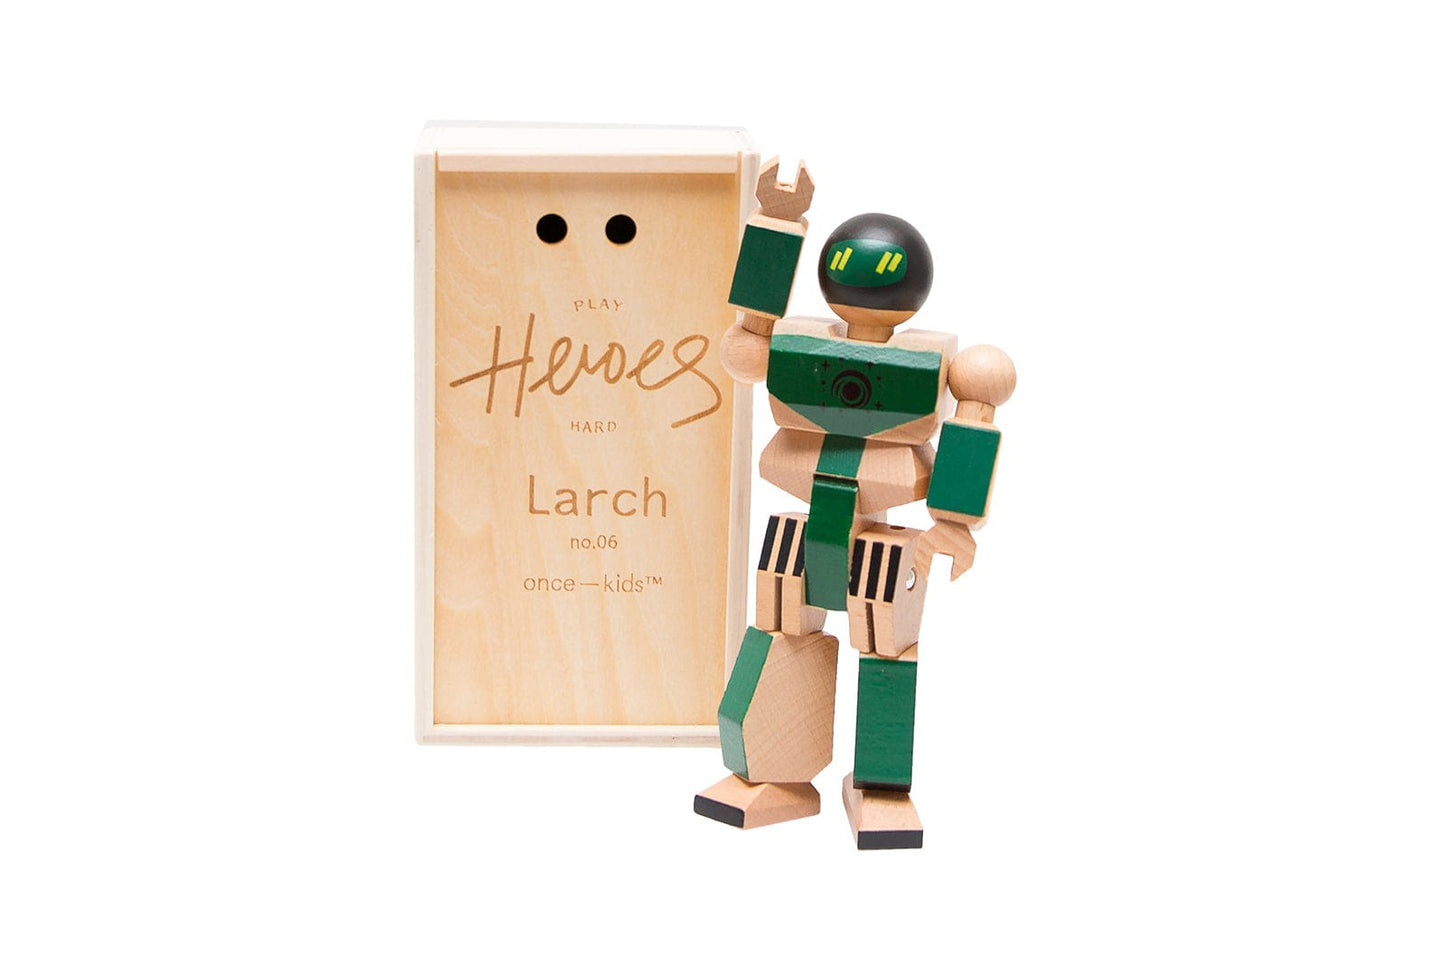 Playhard Heroes #6 Larch